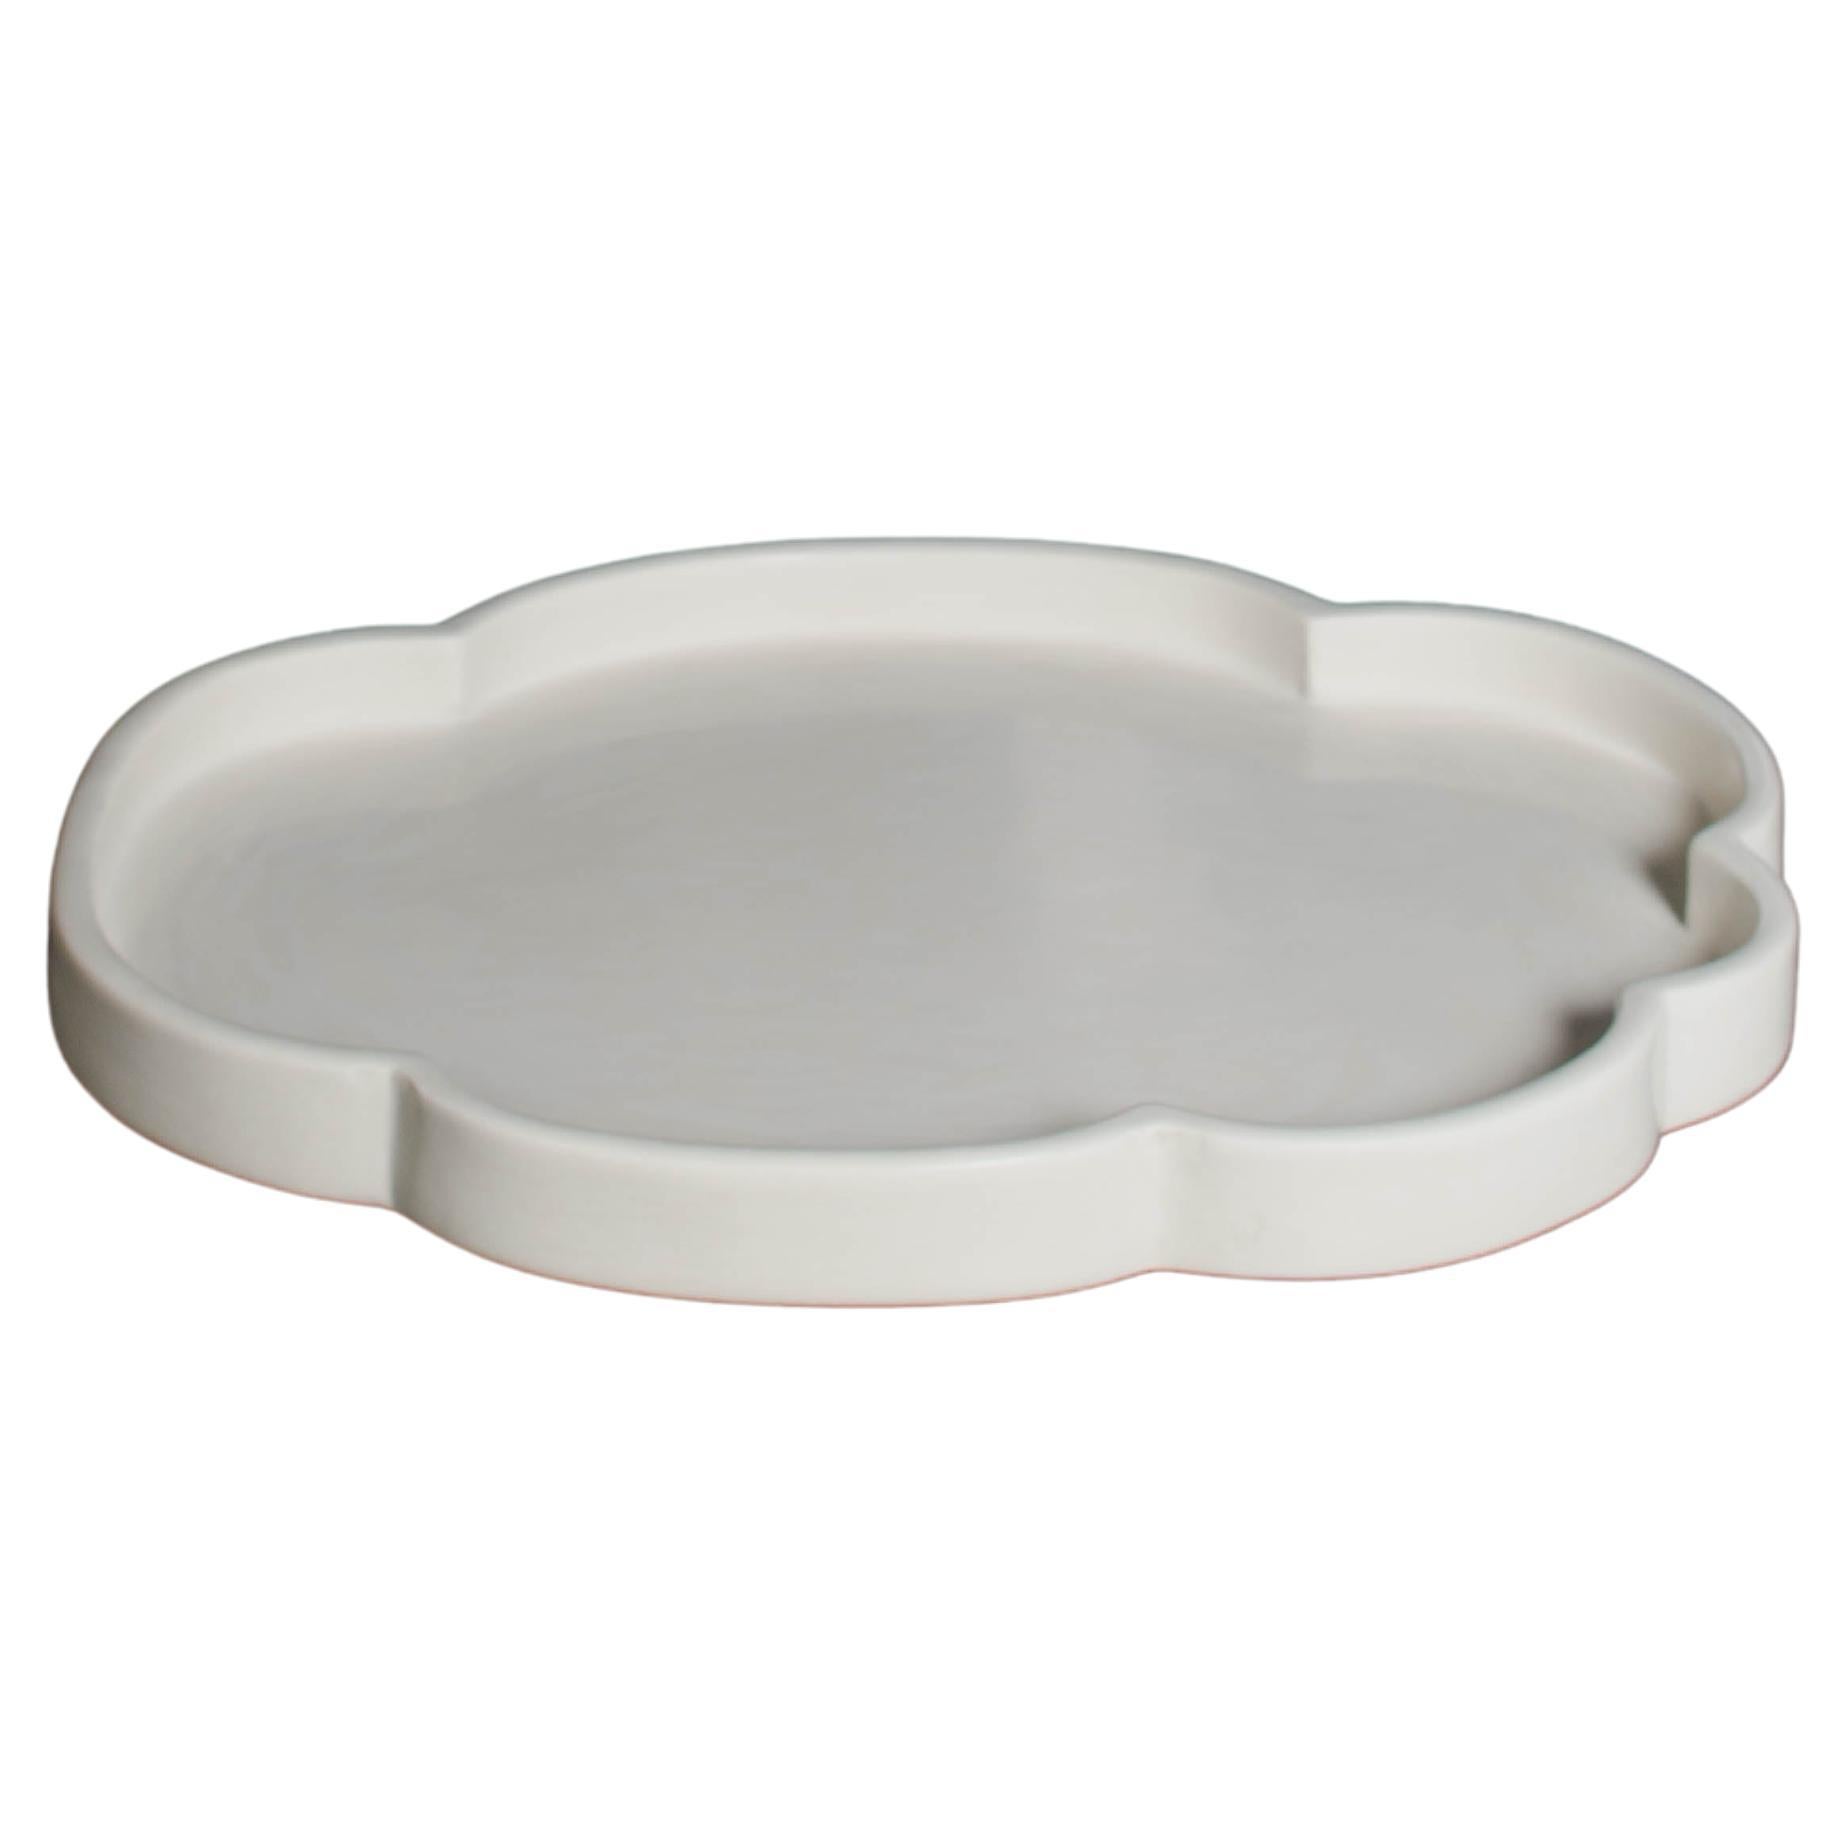 Contemporary Cream Lacquer Cloud Design Tray by Robert Kuo, Limited Edition For Sale